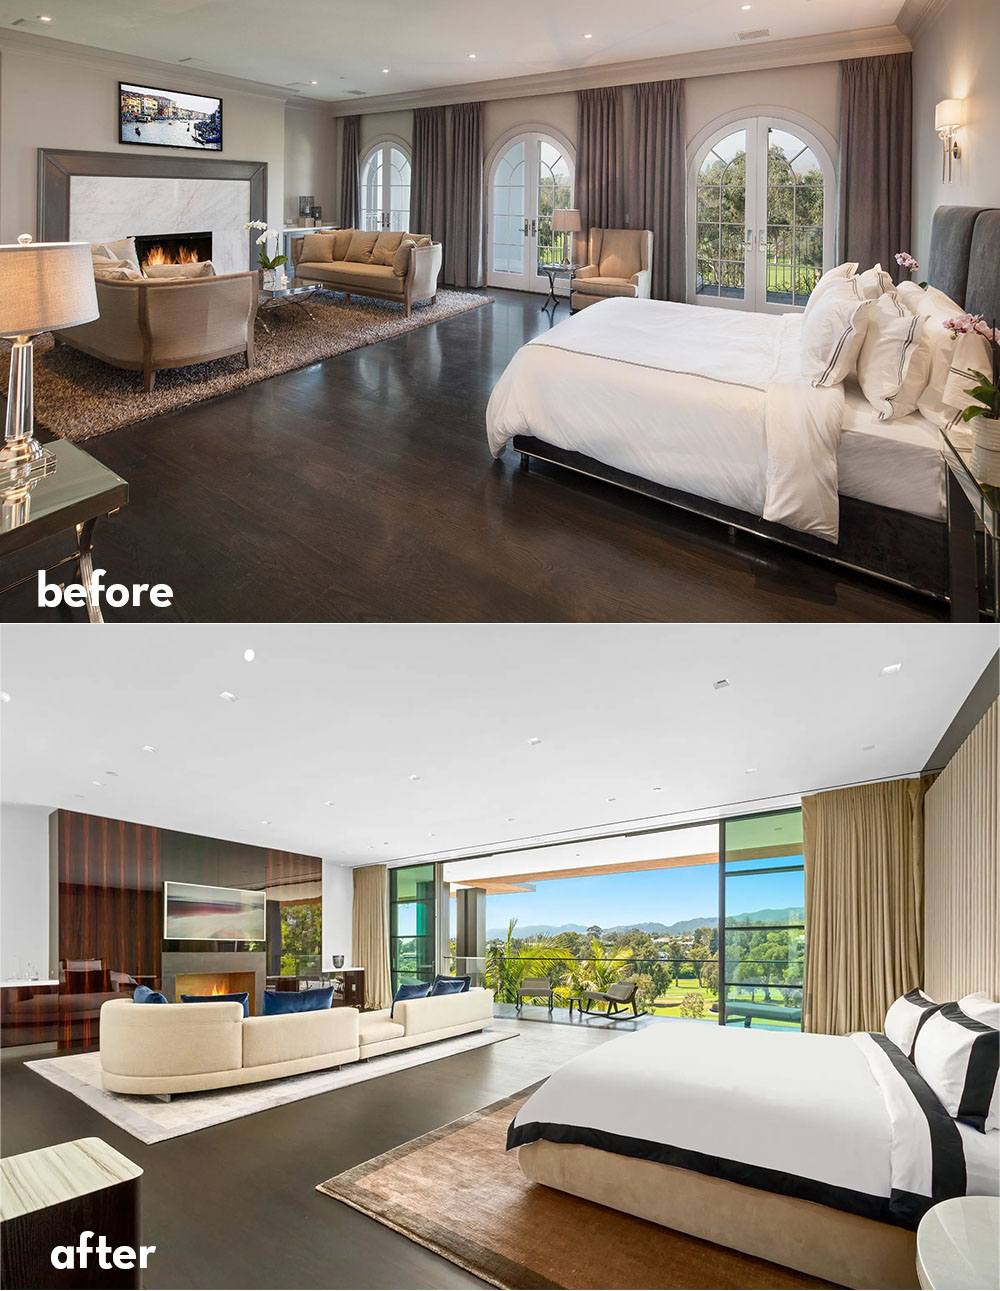 The many master suites with fireplaces and views have all been updated with sliding glass walls replacing French doors